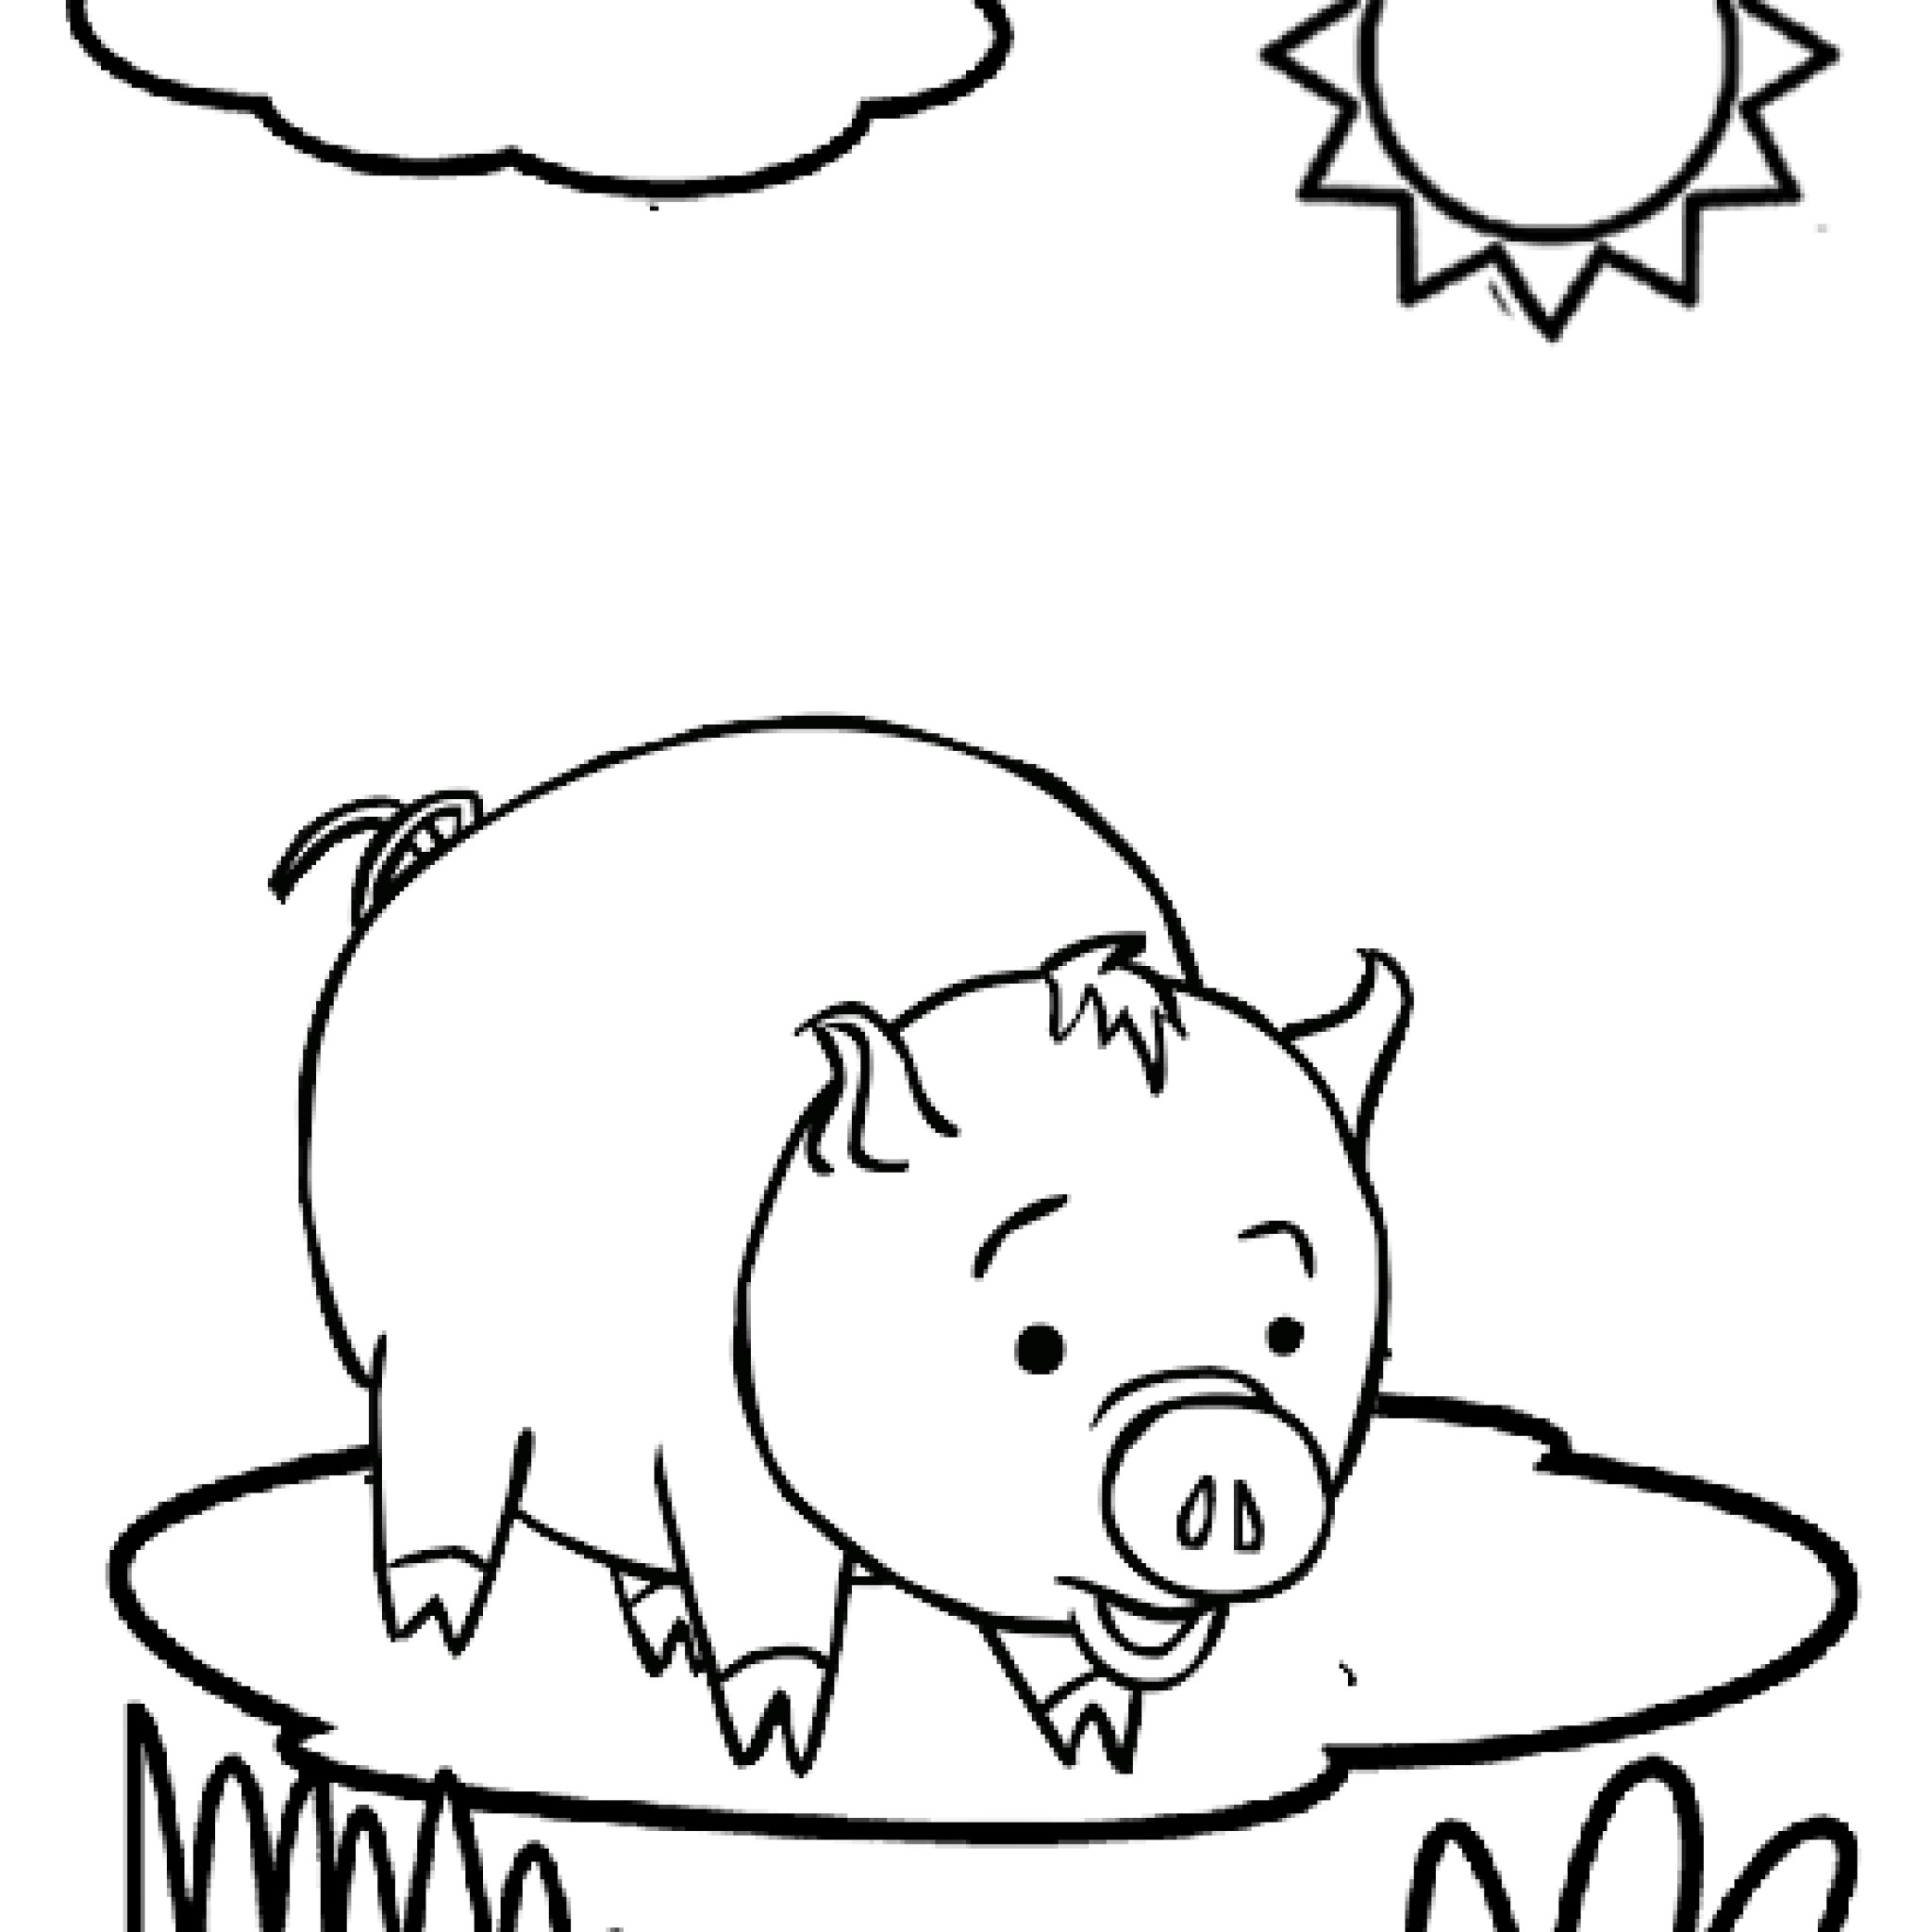 Cute Fat Pig Coloring Page   Mitraland